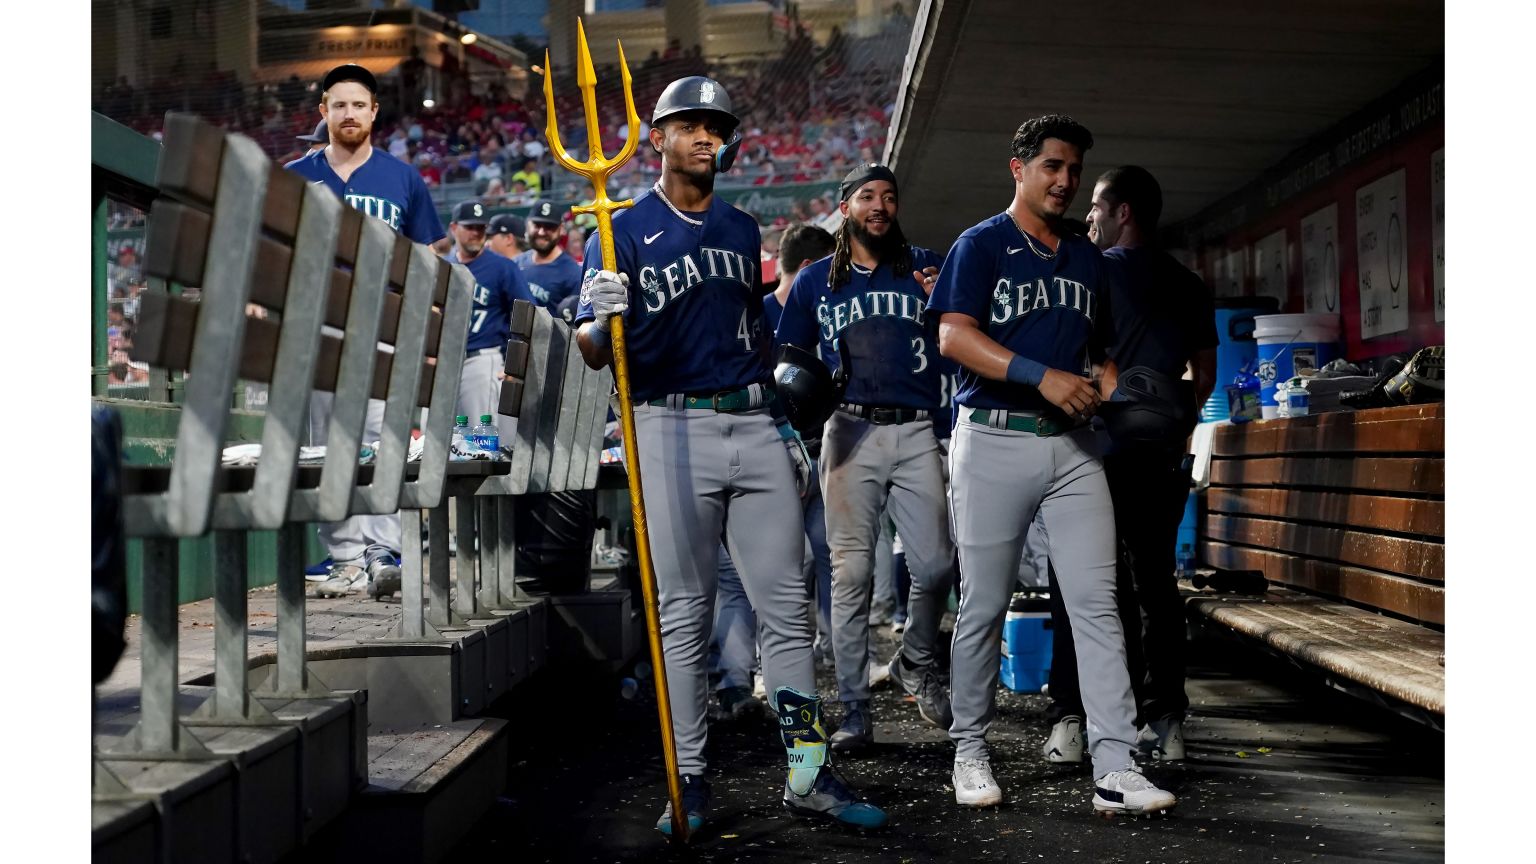 Mariners and Angels PCL Throwback Day Photos